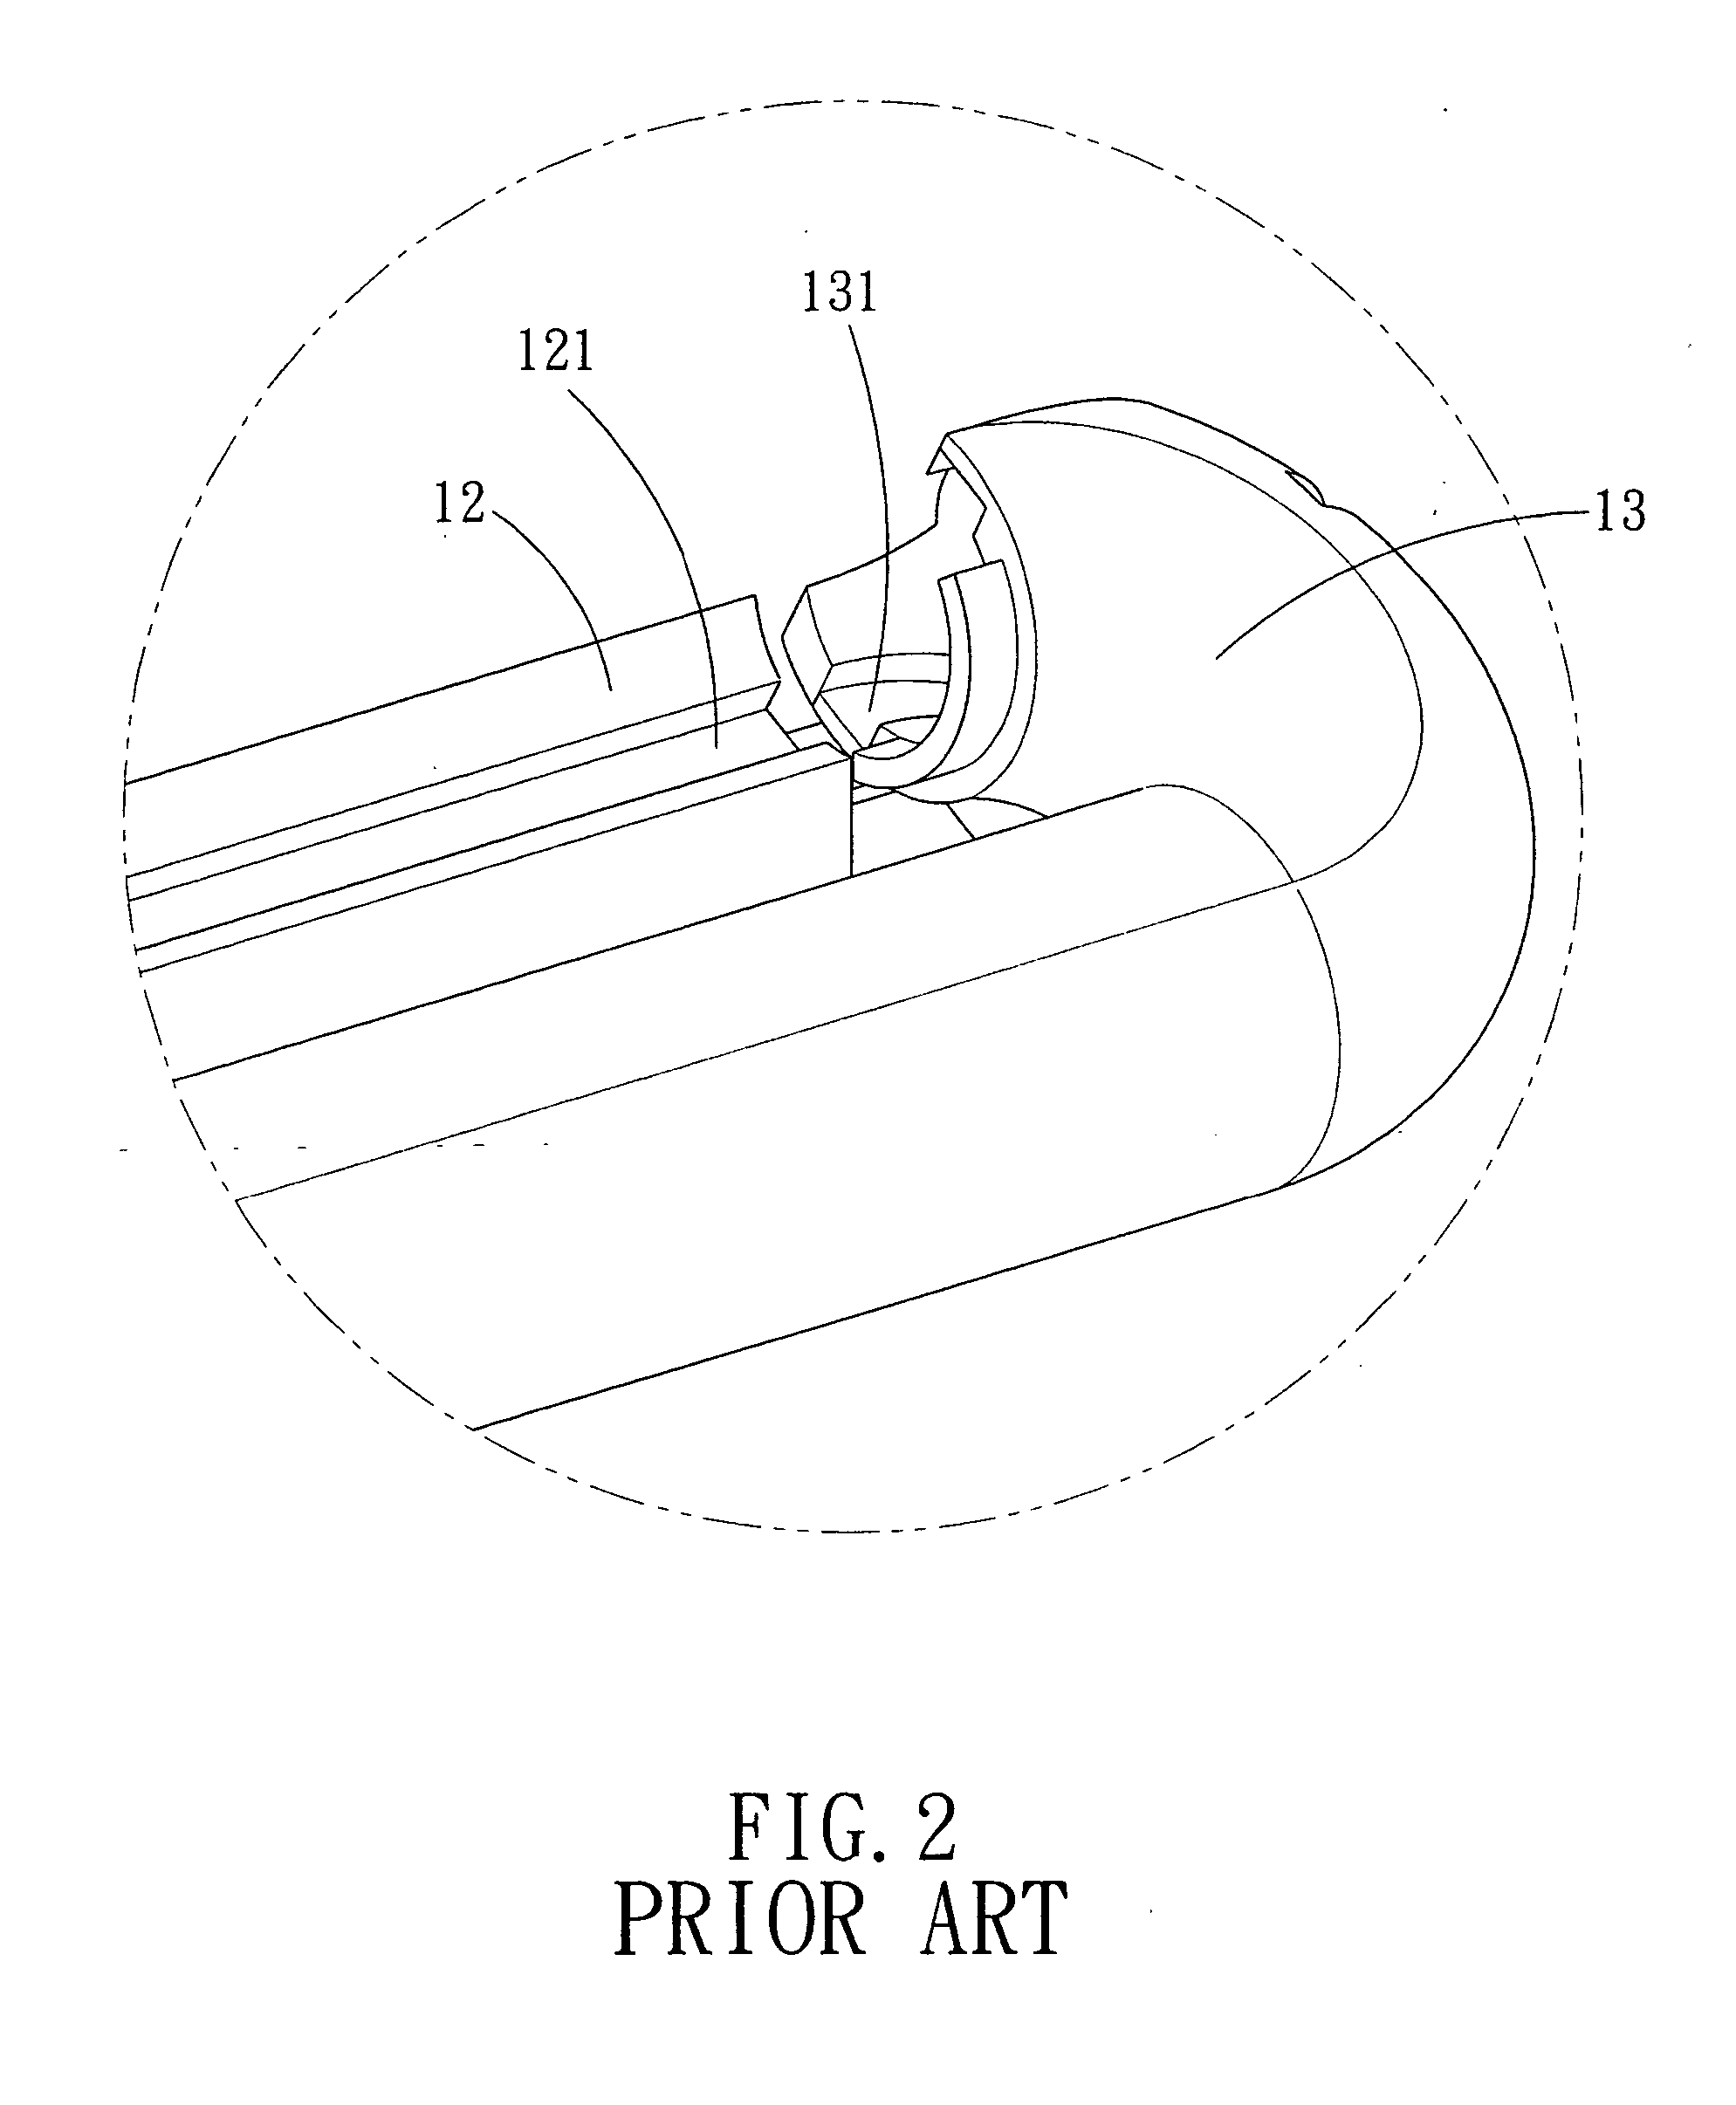 Rolling element retainer for a linear guideway